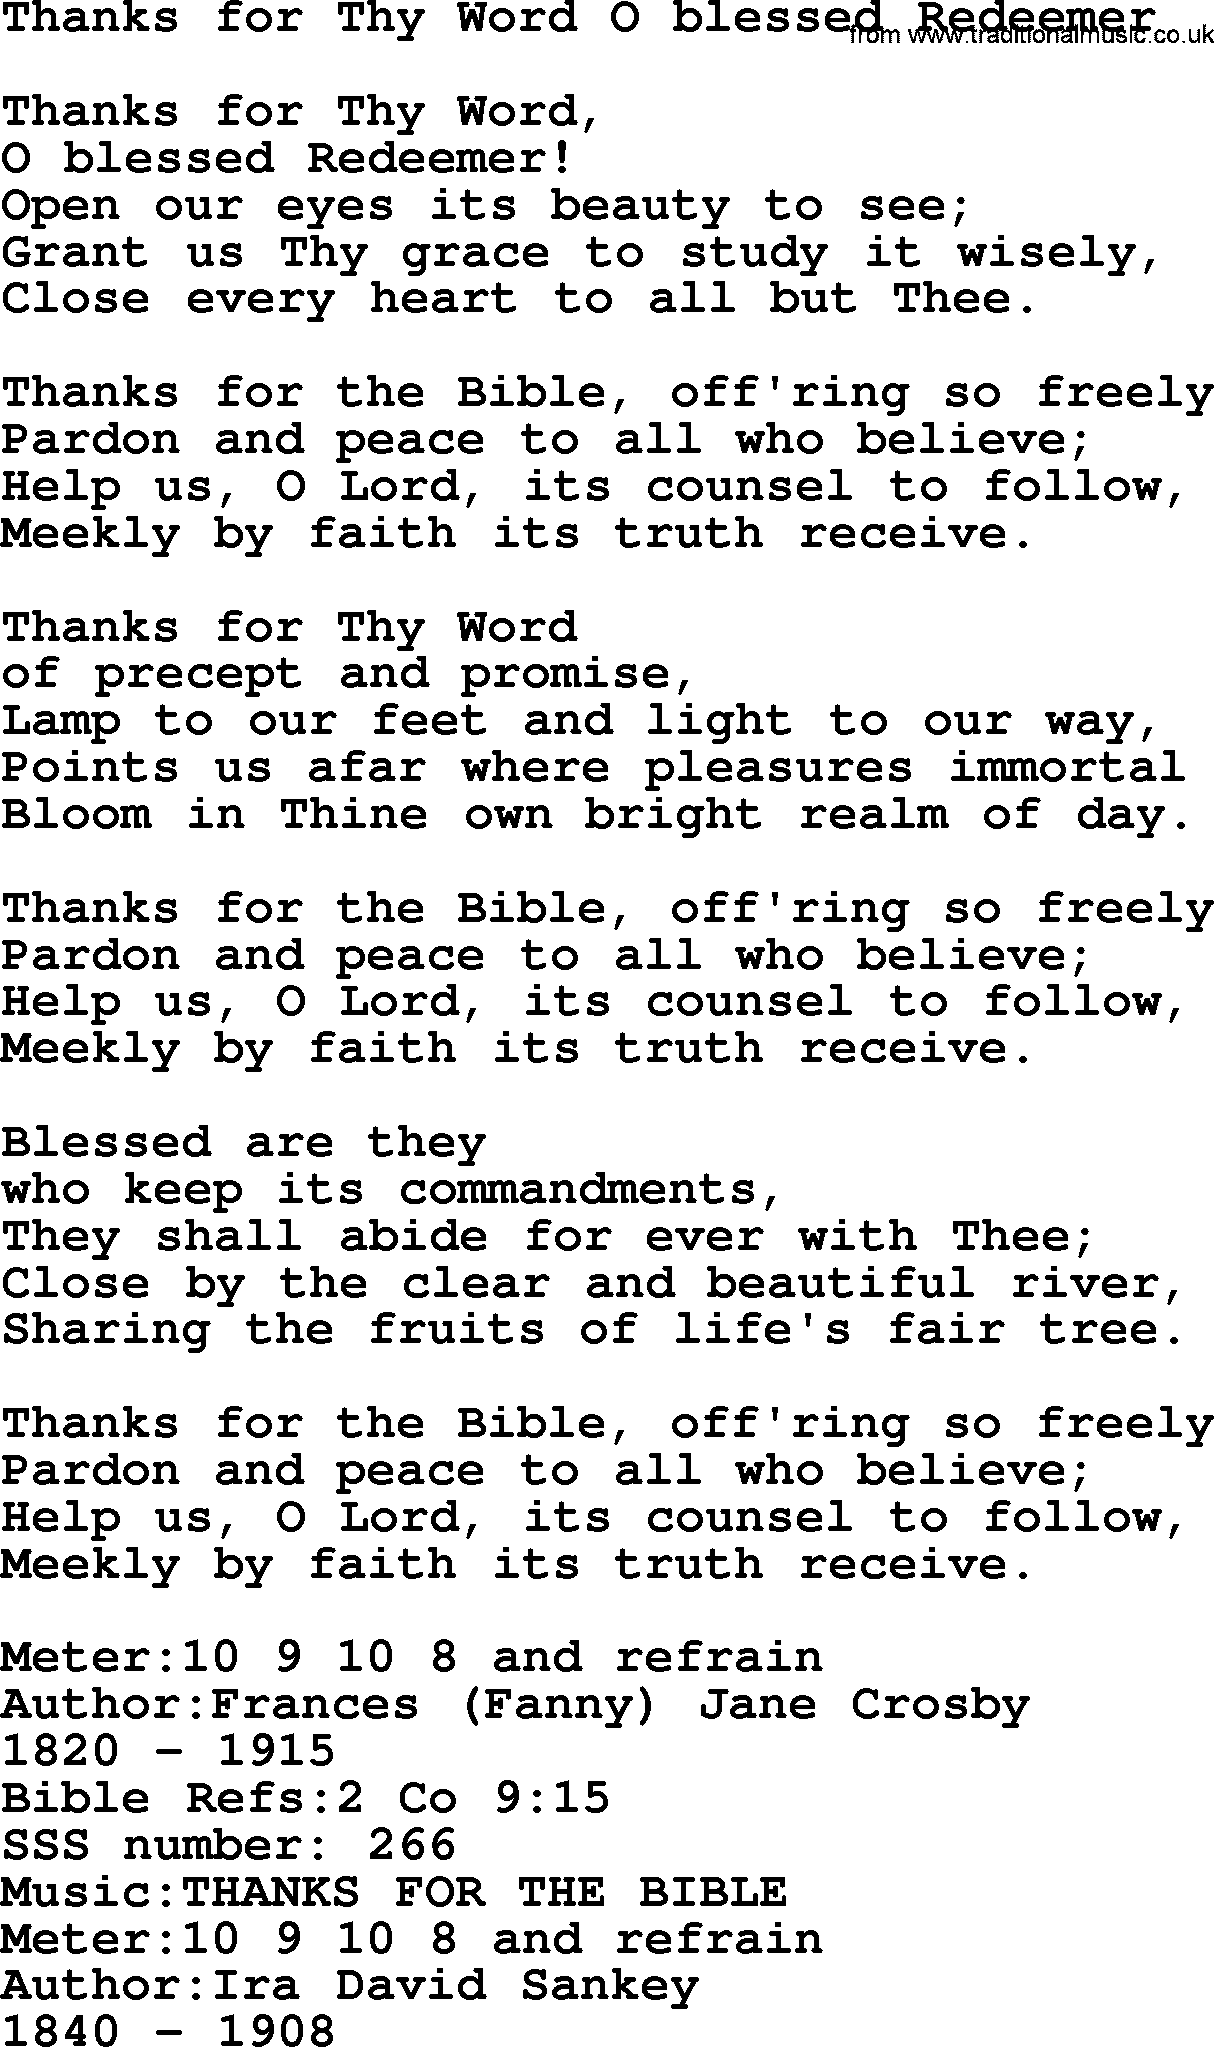 Sacred Songs and Solos complete, 1200 Hymns, title: Thanks For Thy Word O Blessed Redeemer, lyrics and PDF